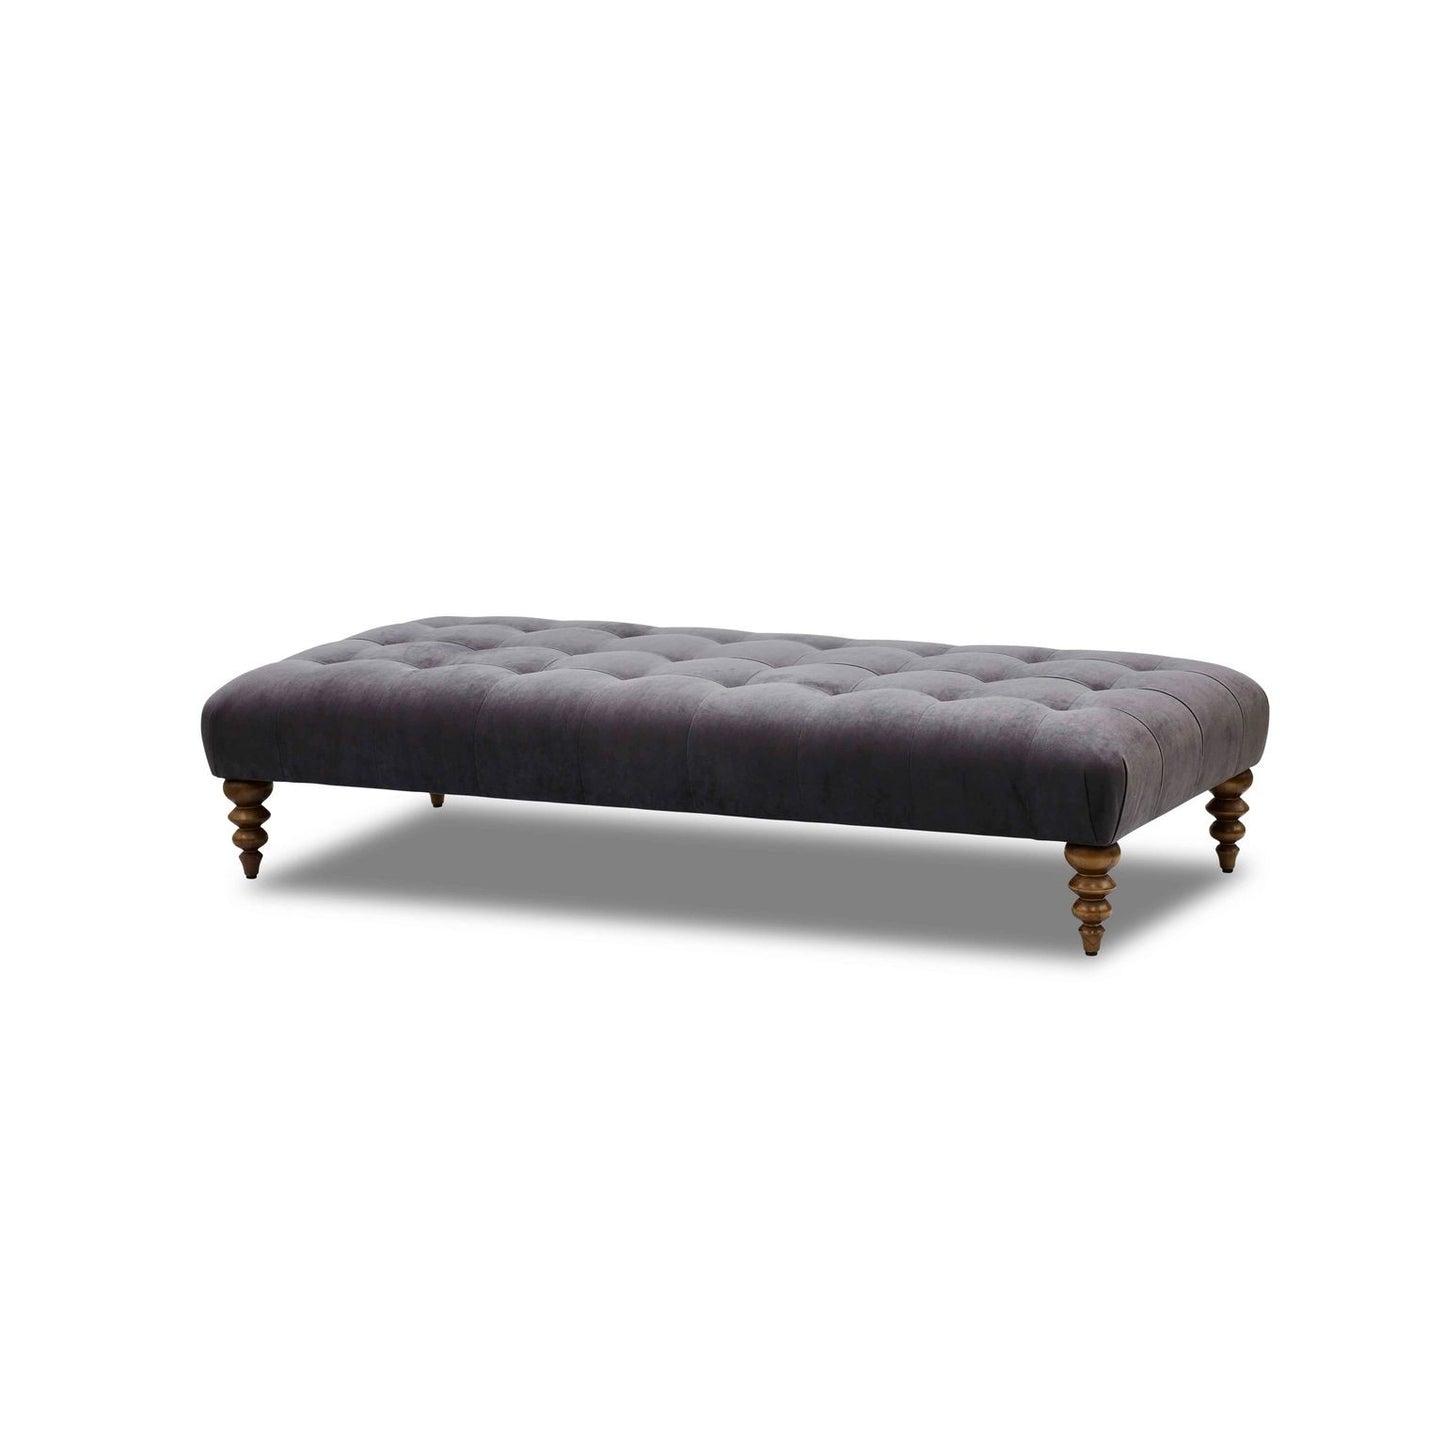 Dimple Ottoman by Molmic available from Make Your House A Home, Furniture Store located in Bendigo, Victoria. Australian Made in Melbourne.